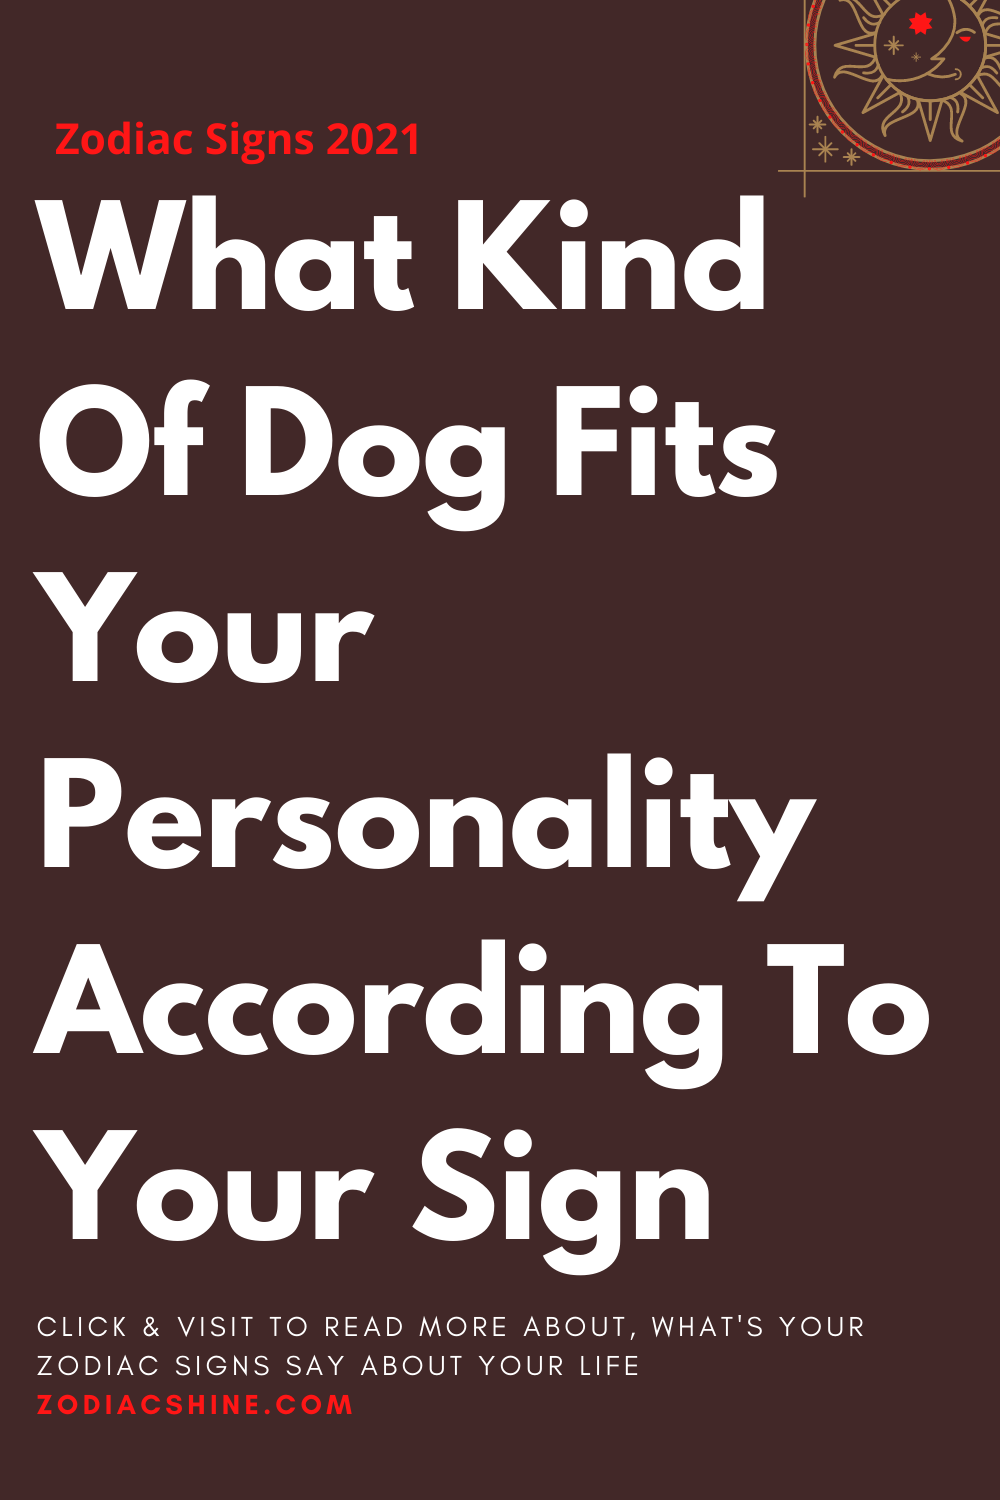 What Kind Of Dog Fits Your Personality According To Your Sign